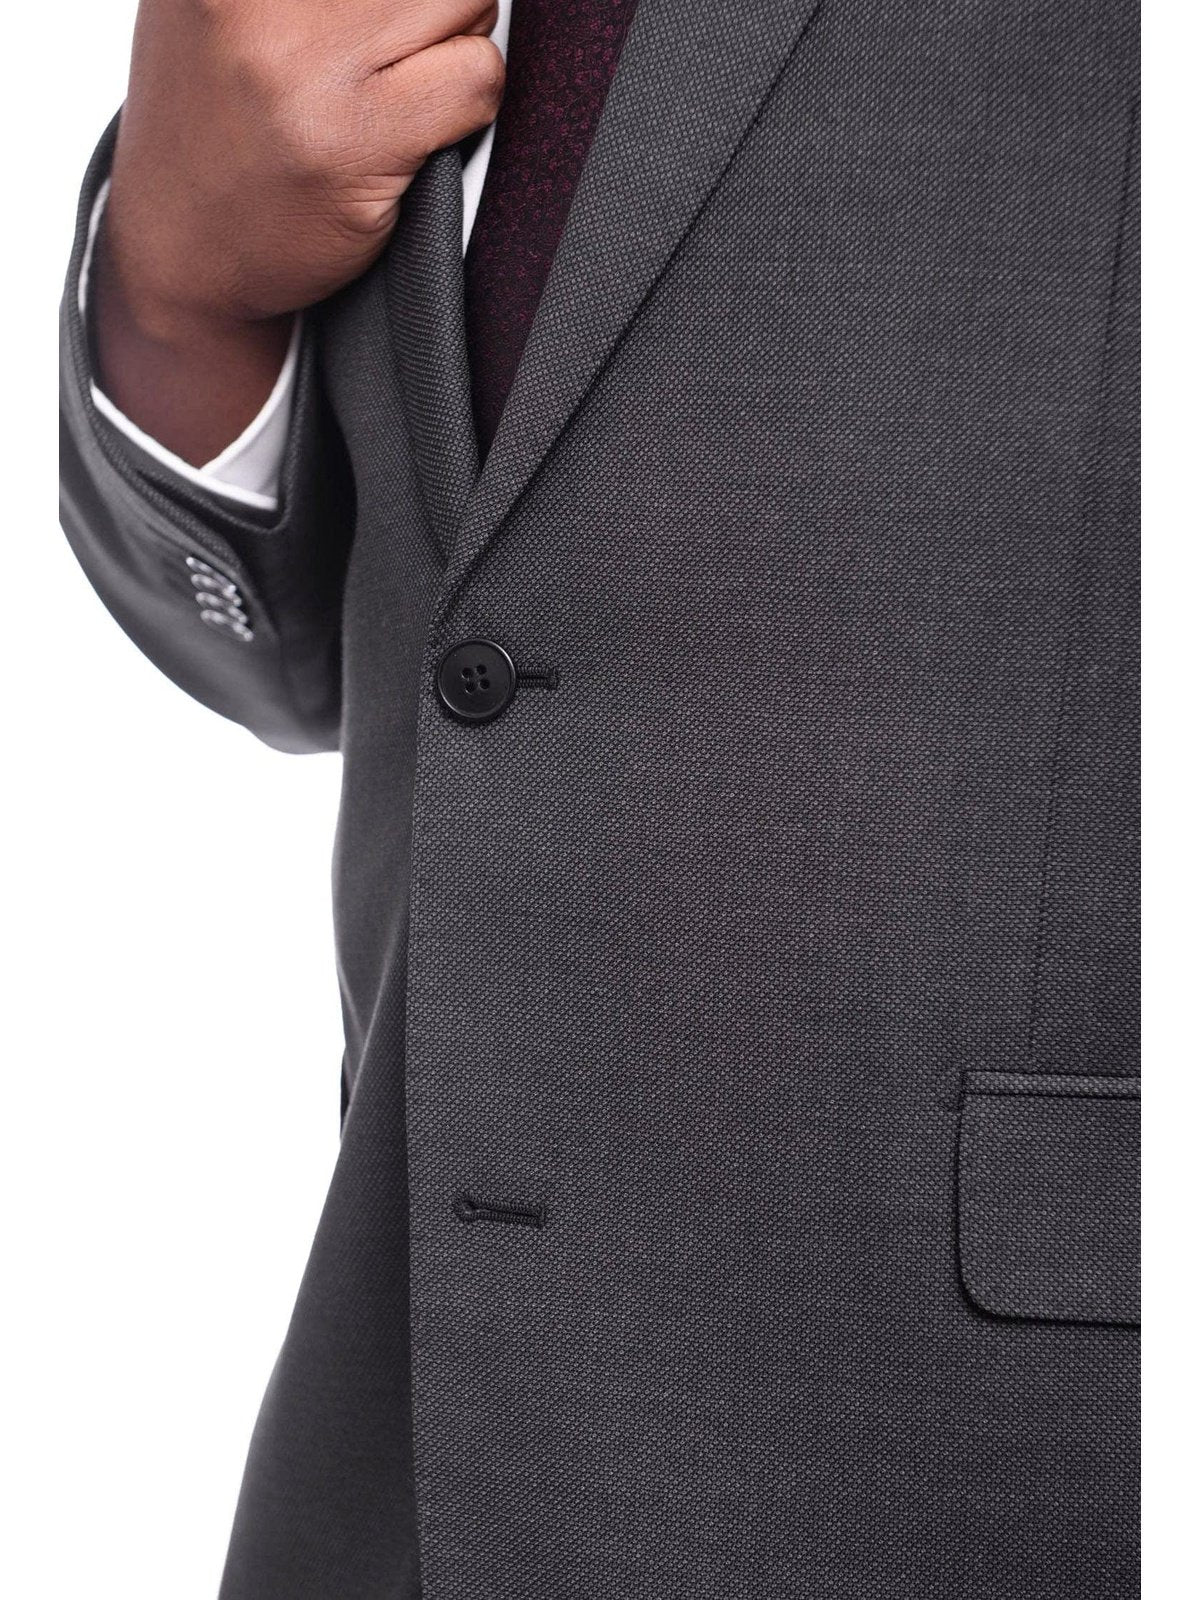 Napoli TWO PIECE SUITS Napoli Classic Fit Charcoal Gray Birdseye Half Canvassed Marzotto Wool Suit